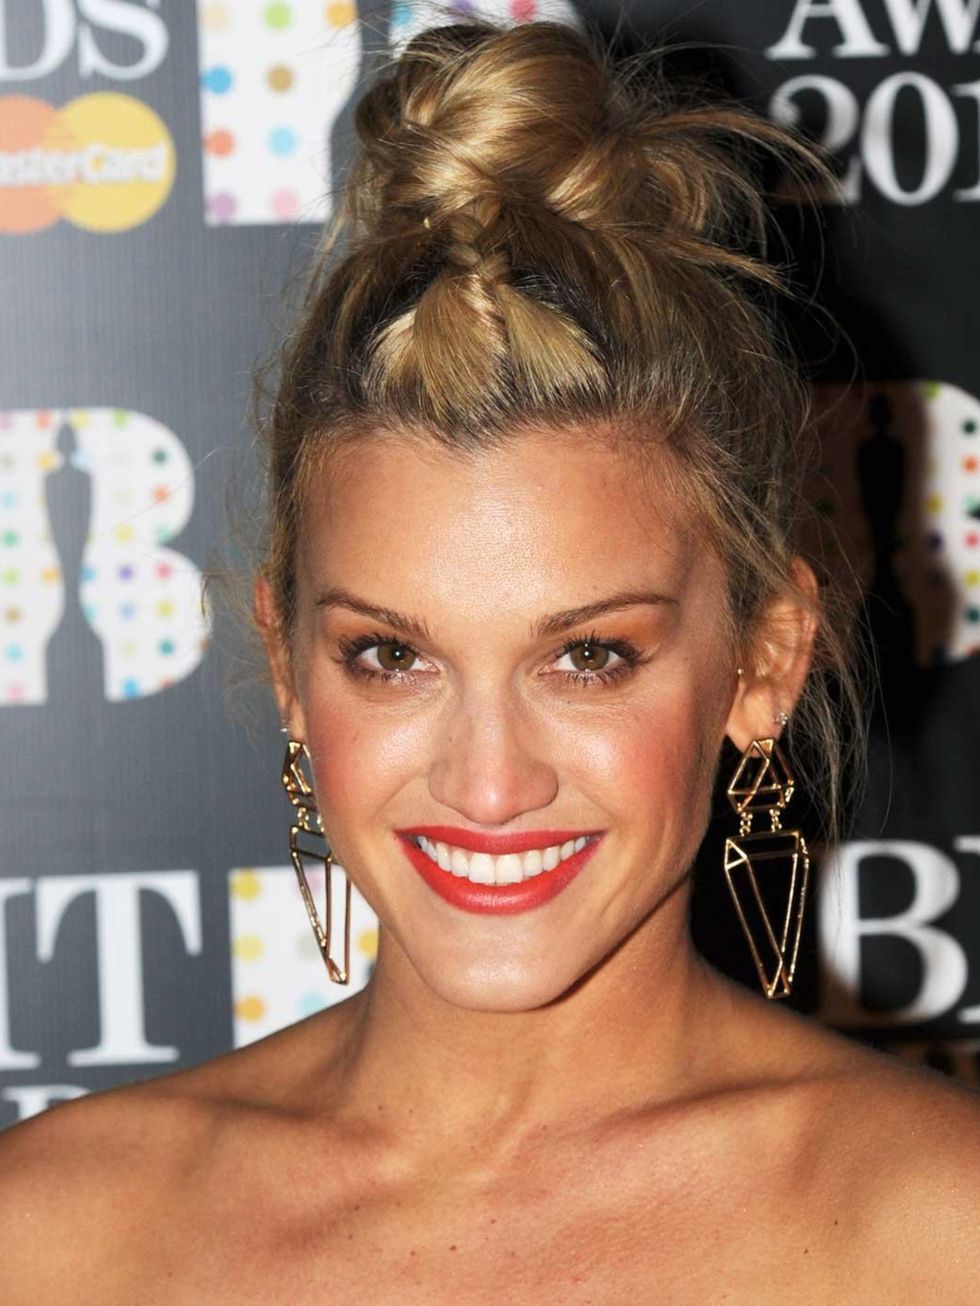 <p>Ashley Roberts adds interest to her messy <a href="http://www.elleuk.com/beauty/ask-elle/how-do-i-perfect-the-dolly-bun">dolly bun</a> with a small braid.</p>